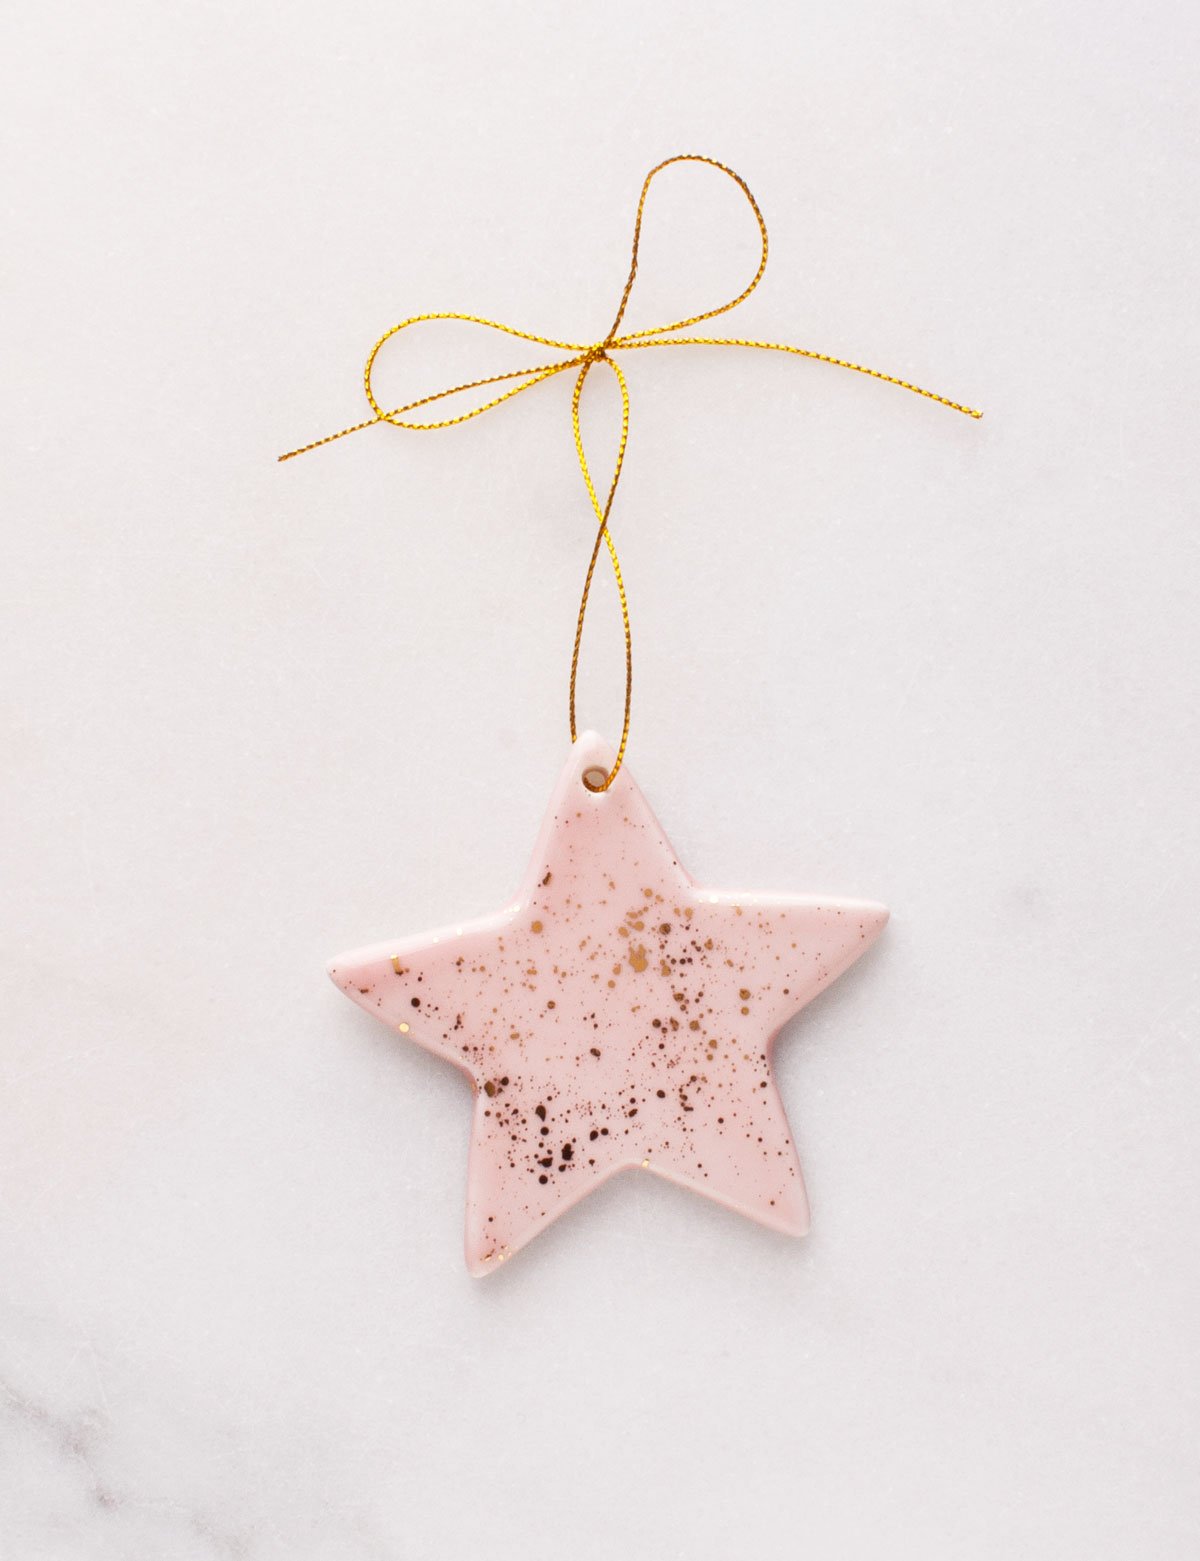 Star Ornament Rose Gold Hammered Effect New 